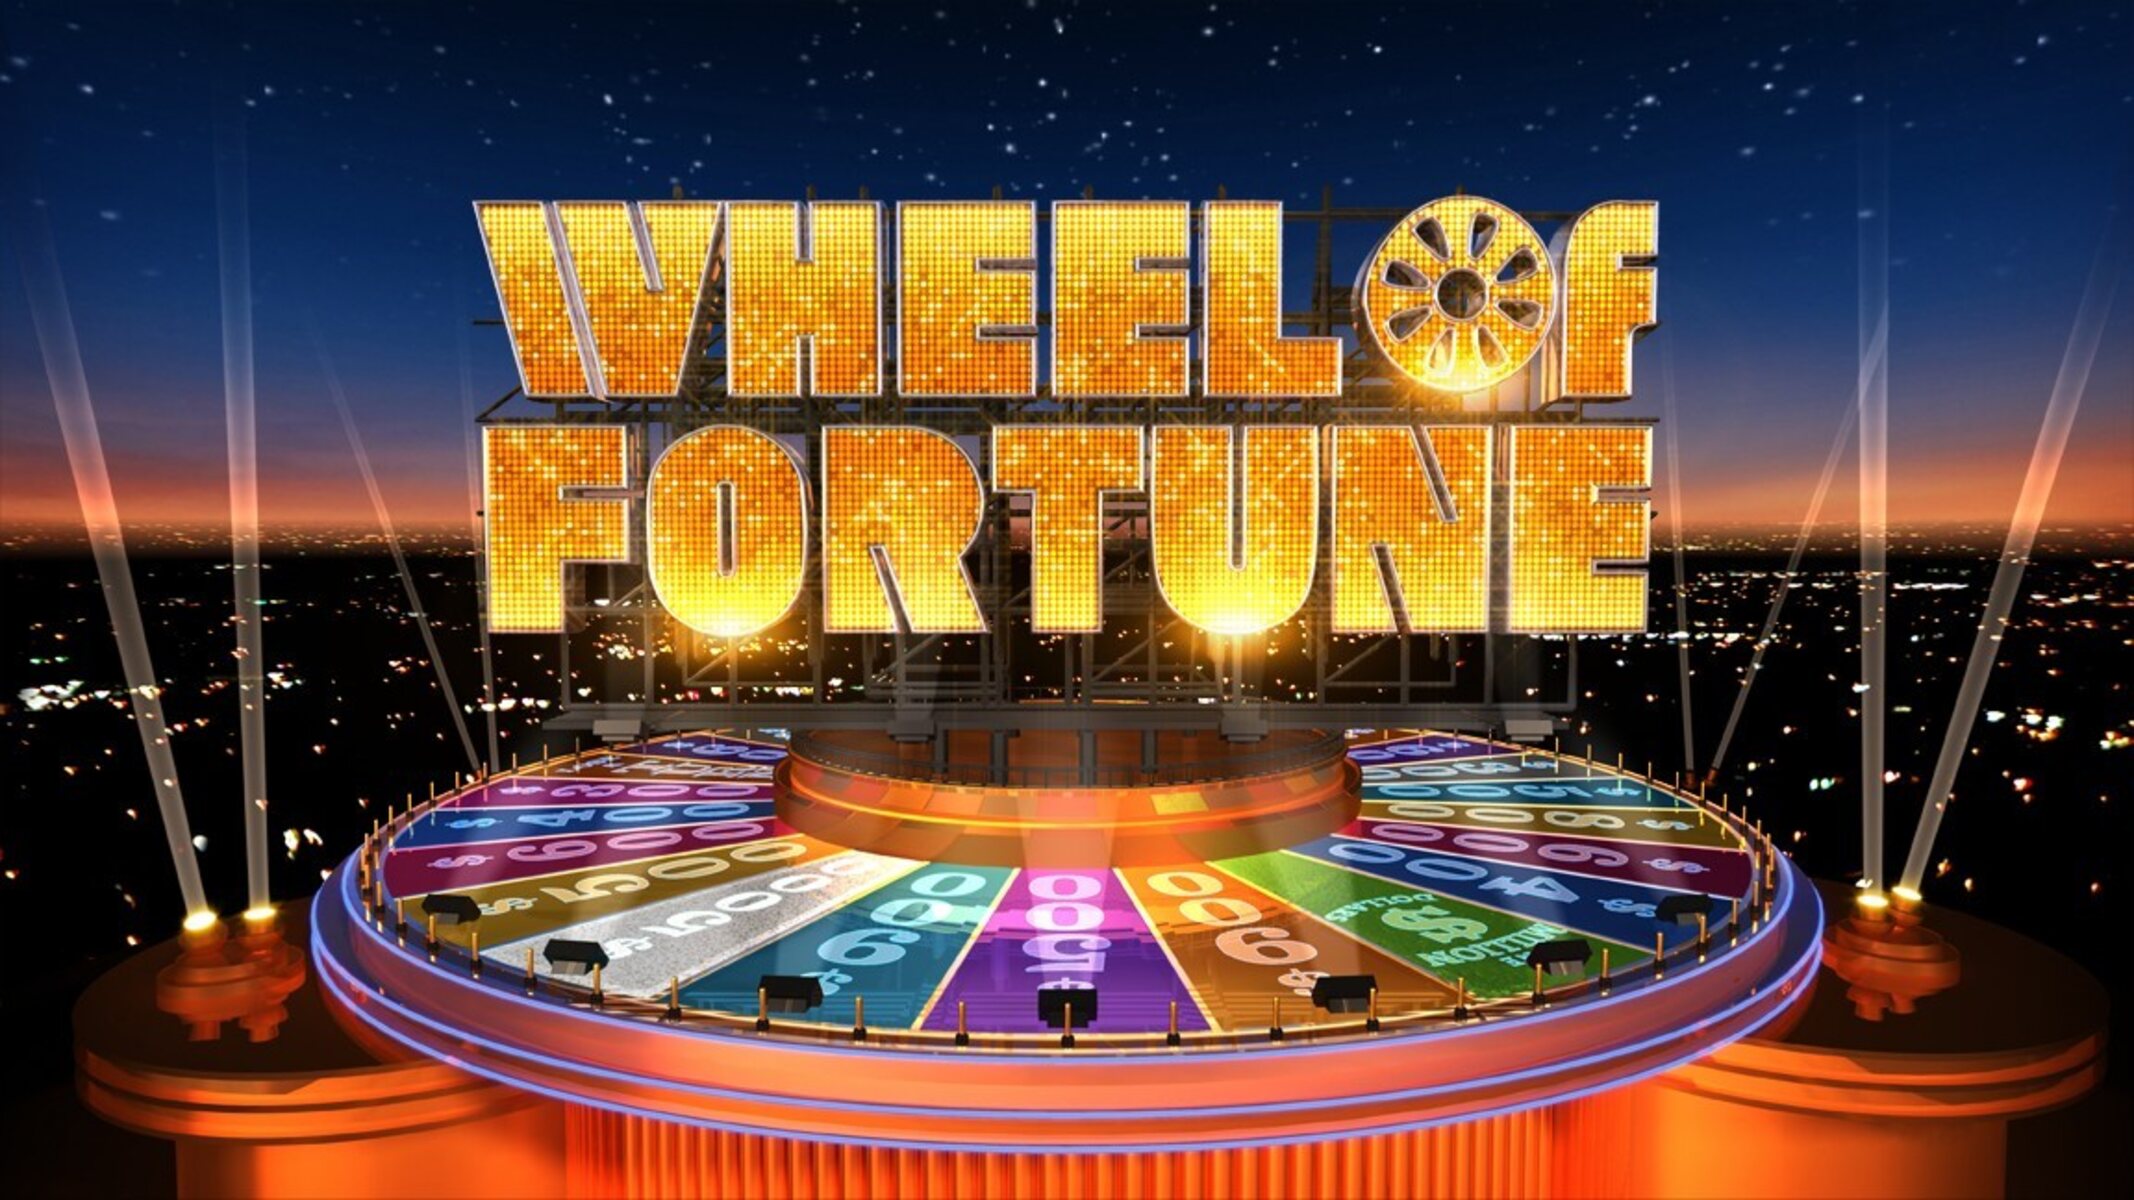 How To Watch Wheel Of Fortune Without Cable